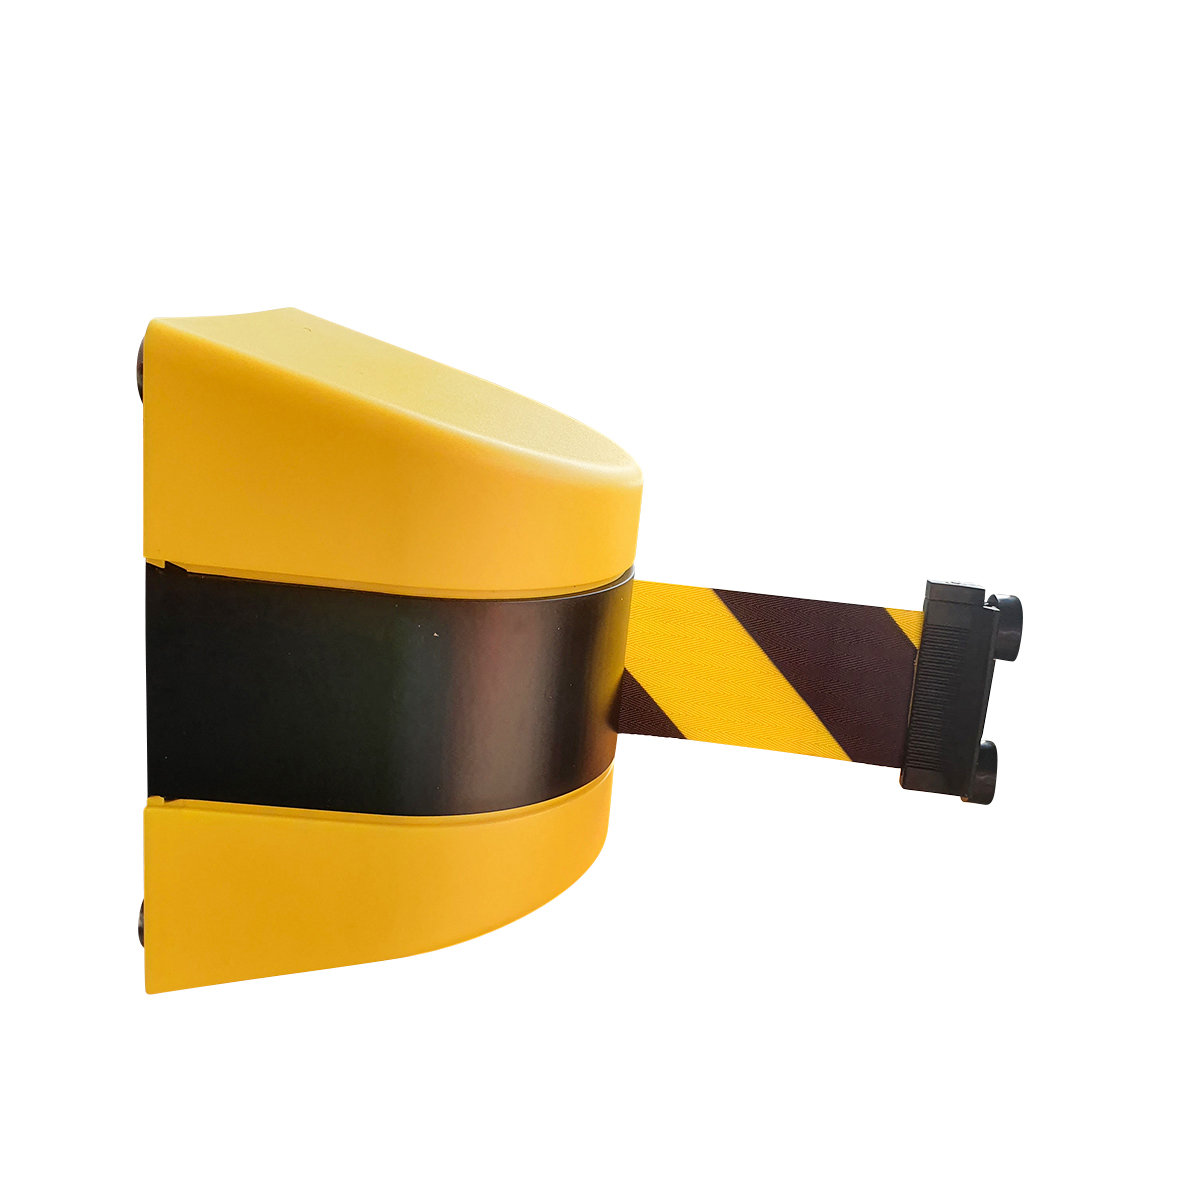 Buy Wall Mounted Belt Barrier in Expandable Barriers from GuardX available at Astrolift NZ